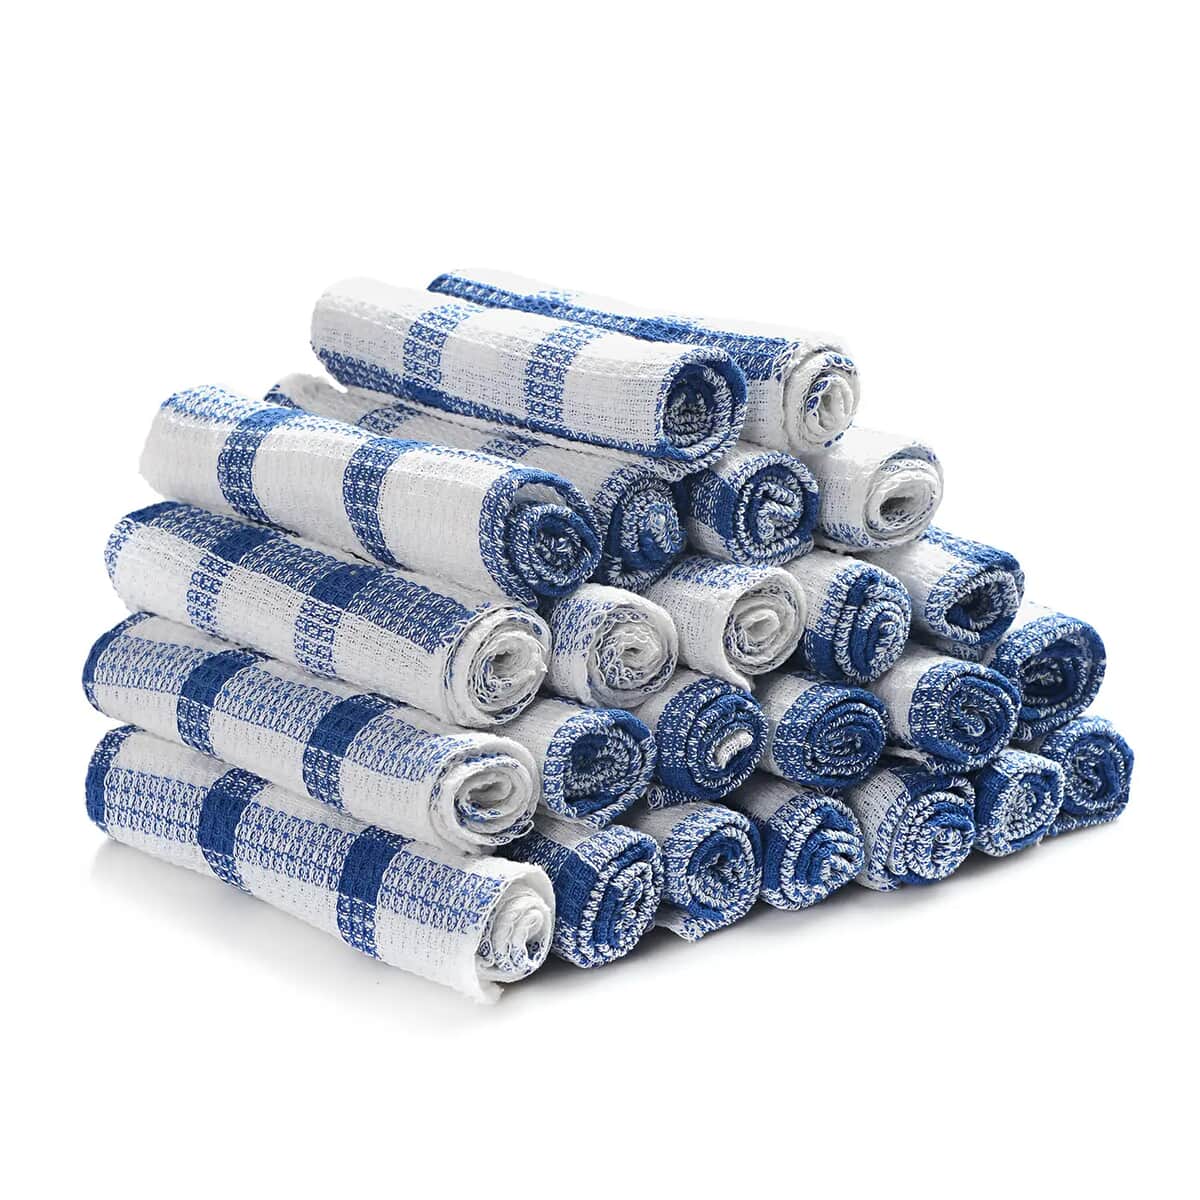 Buy Set of 10 Navy Blue Checked Cotton Kitchen Towels at ShopLC.